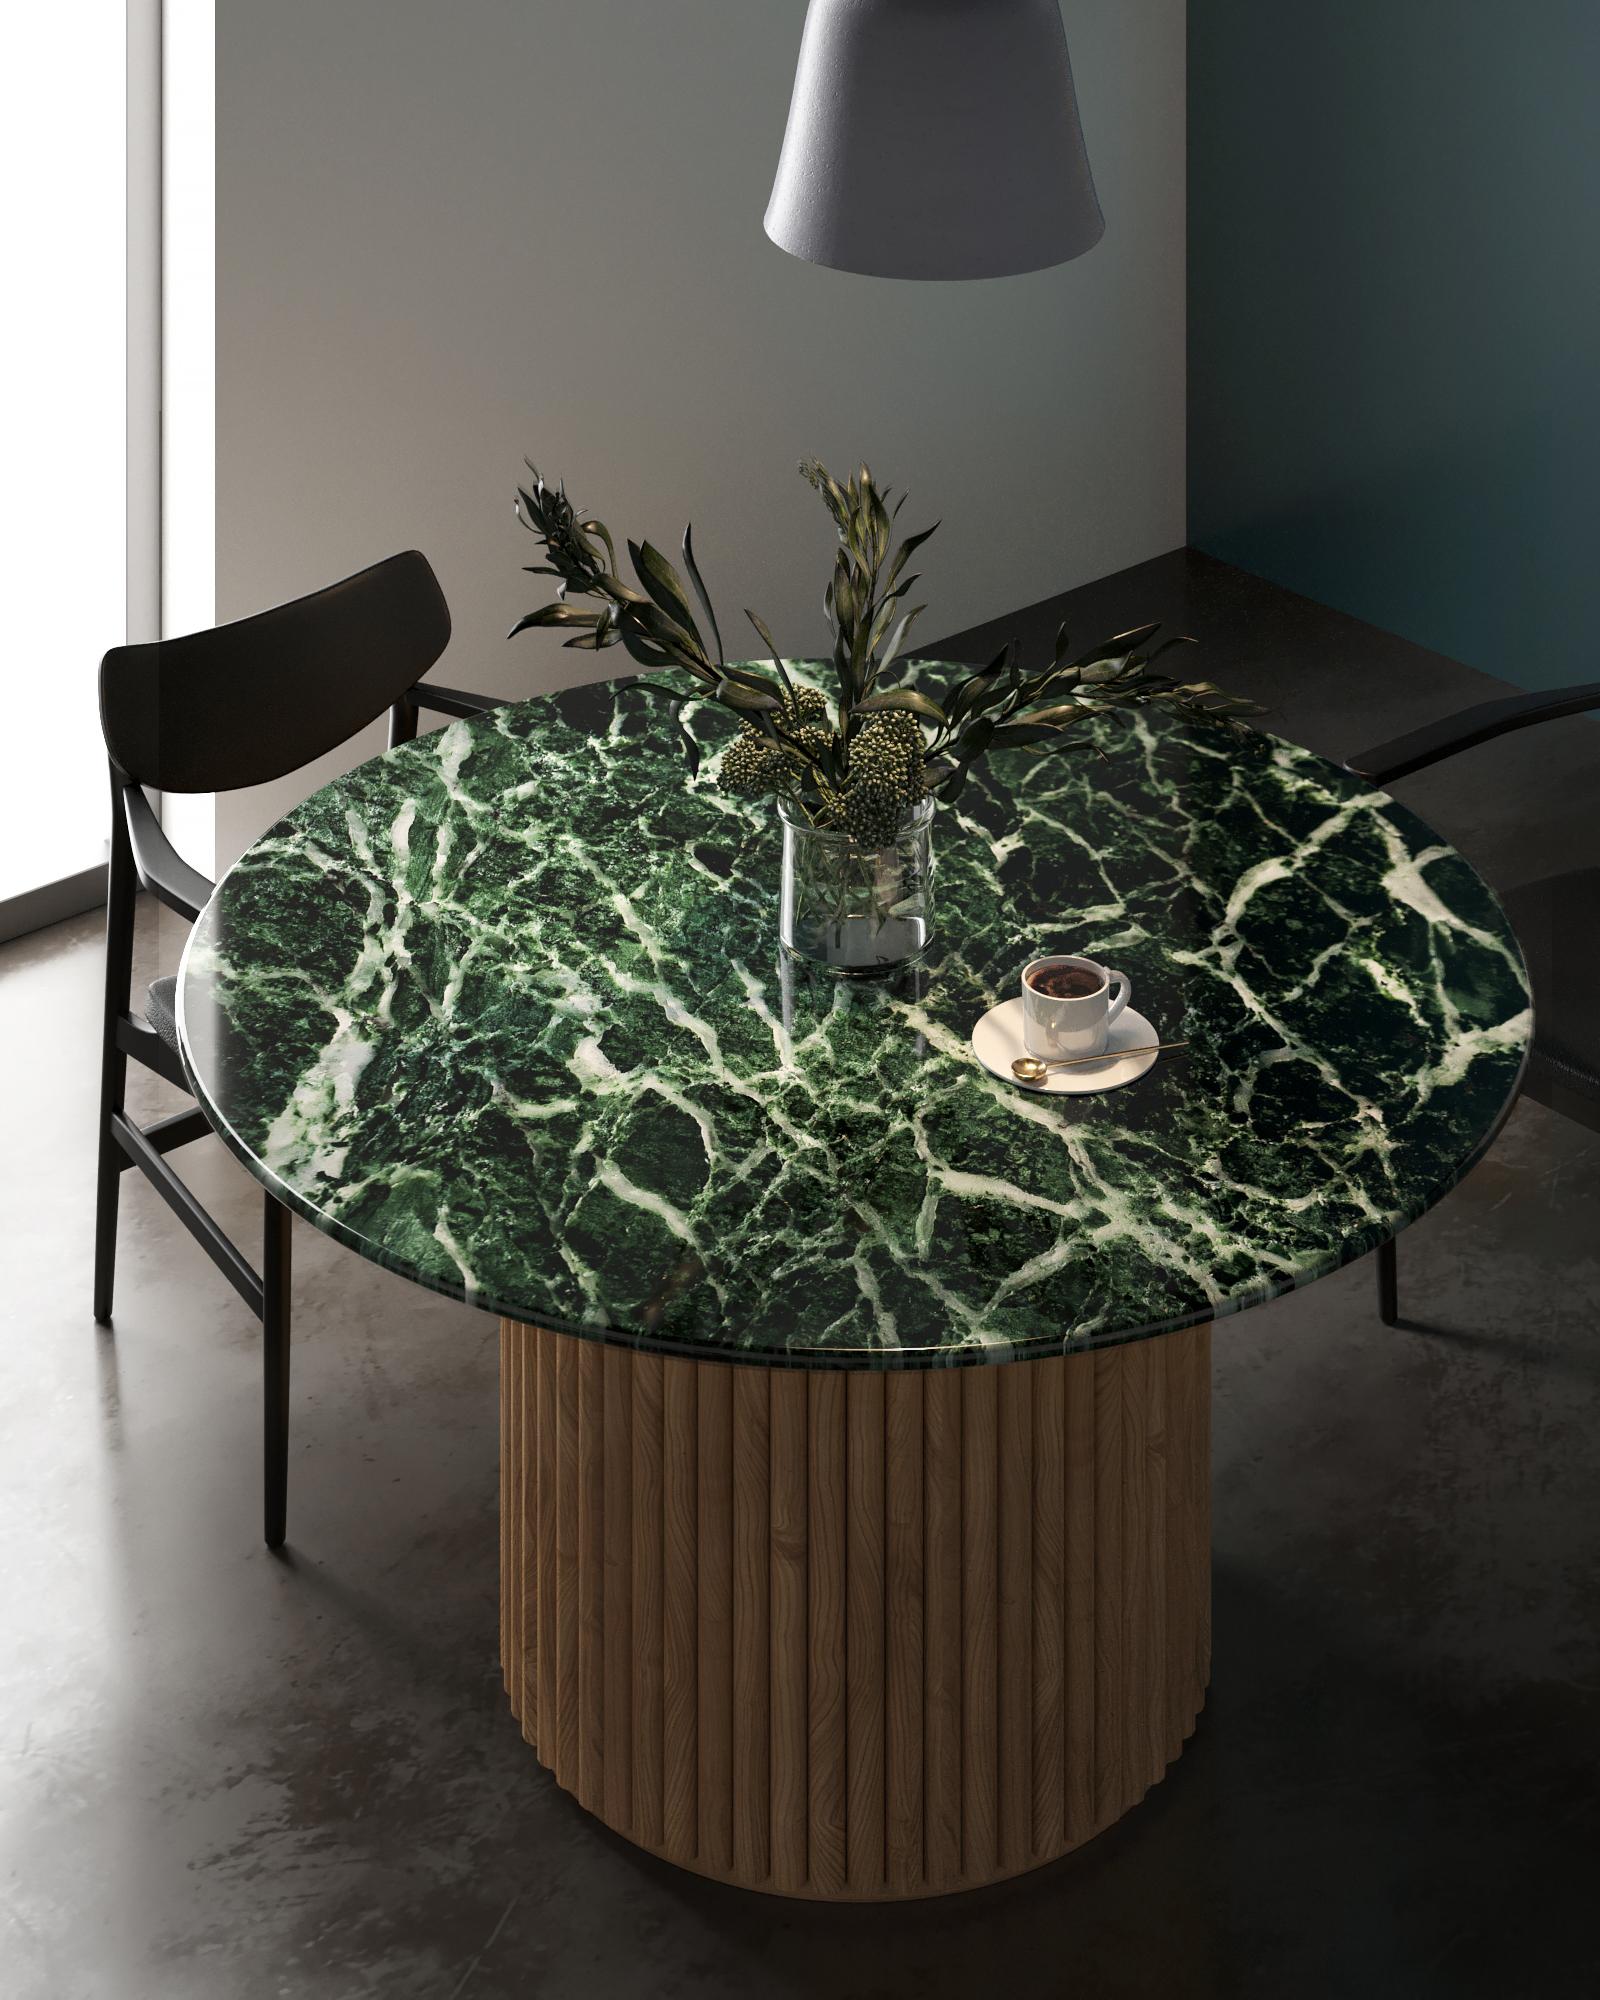 Chinese NORDST Mette Round Dining Table, Italian Green Marble, Danish Modern Design, New For Sale